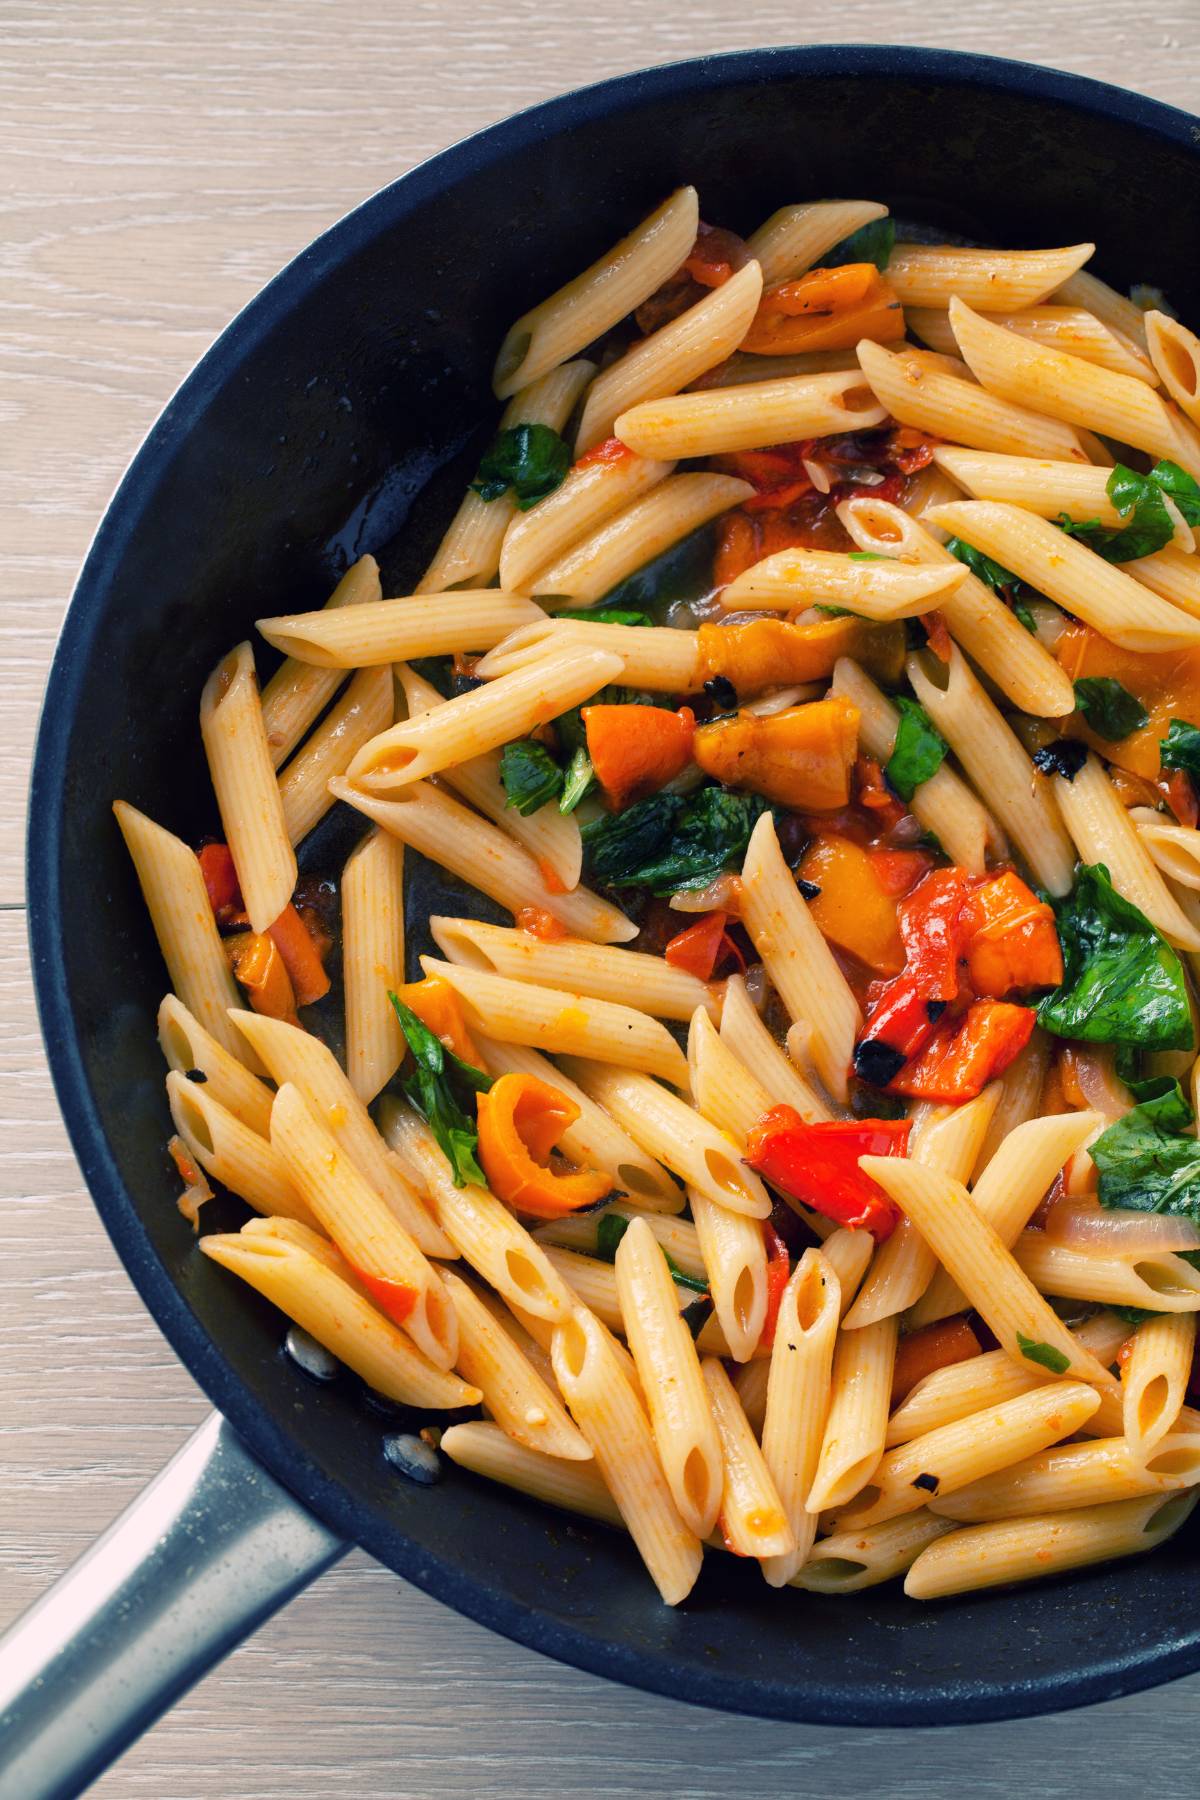 30-minute Pasta Dishes: For Your Next Event